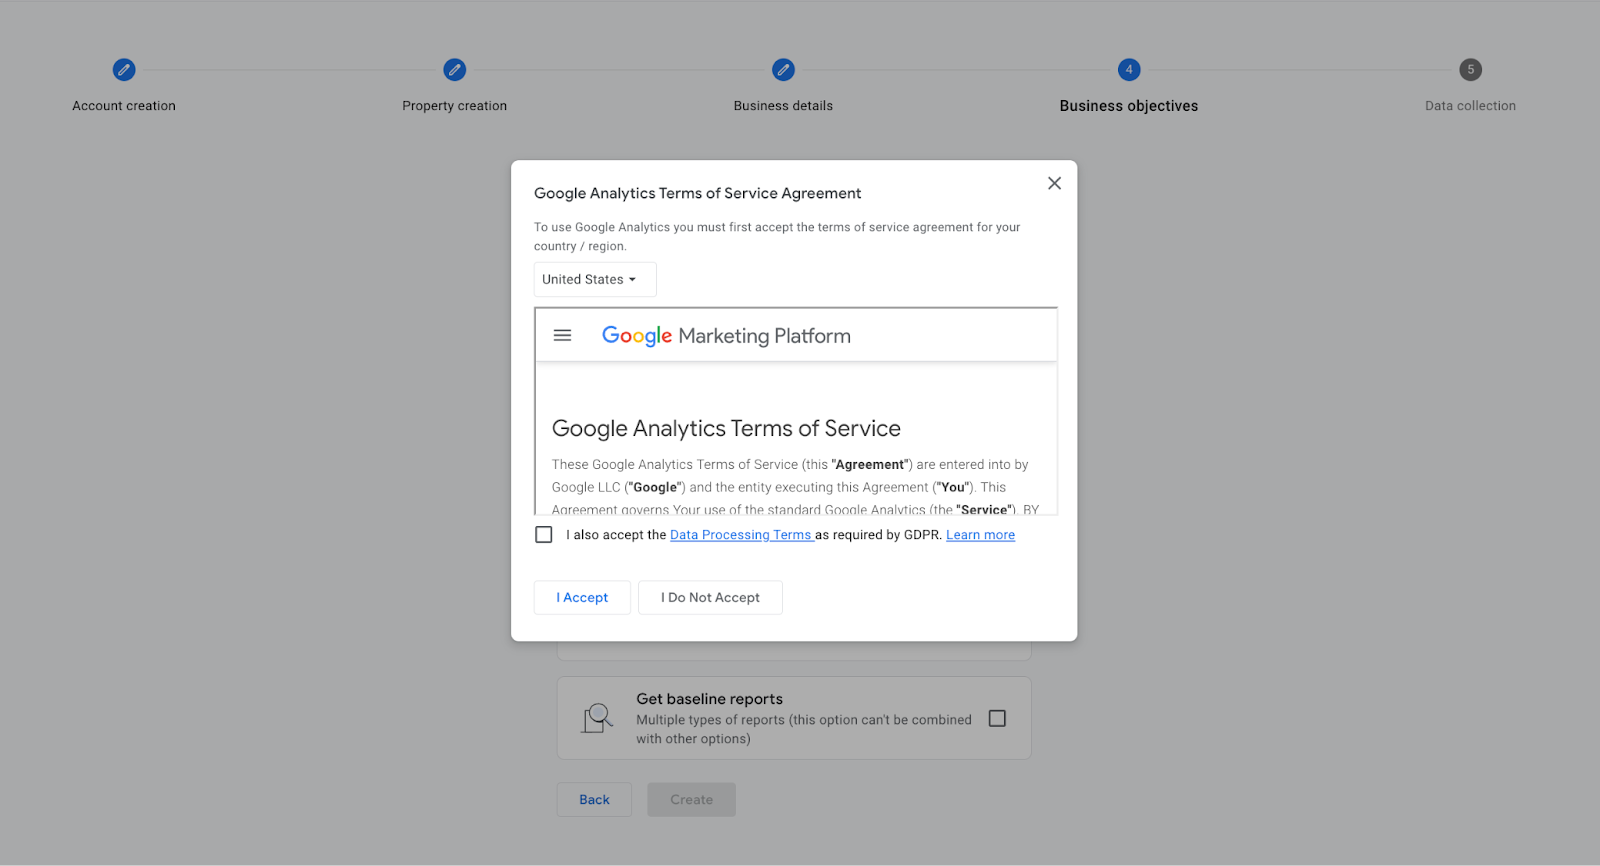 Google Analytics 'Terms of Service' agreement that outlines data collection policies and processing terms.